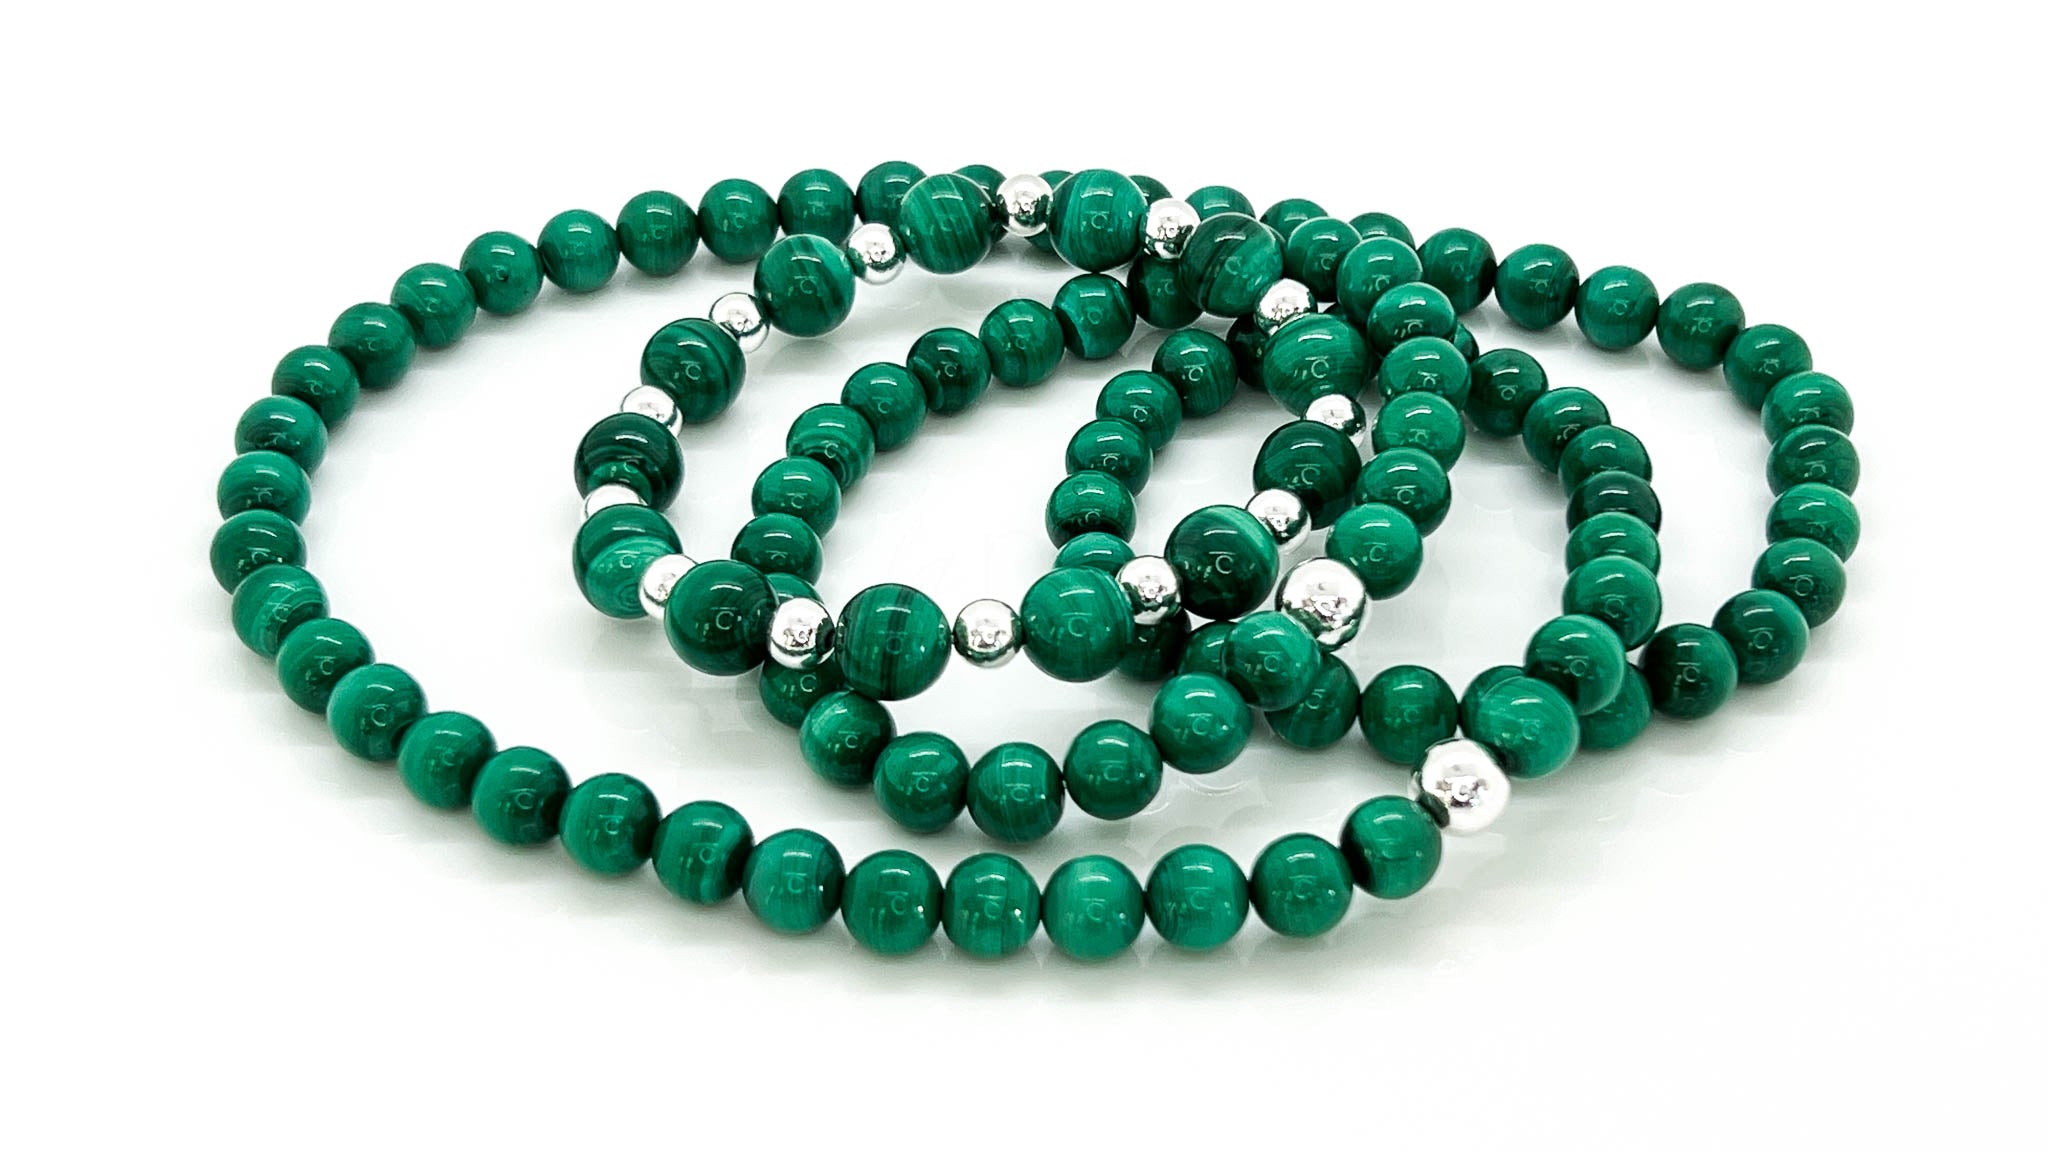 Buy SATYAMANI Natural Stone Malachite Necklace for Balance in  Relationships, Color- Green, for Men & Women (Pack of 1 Pc.) at Amazon.in